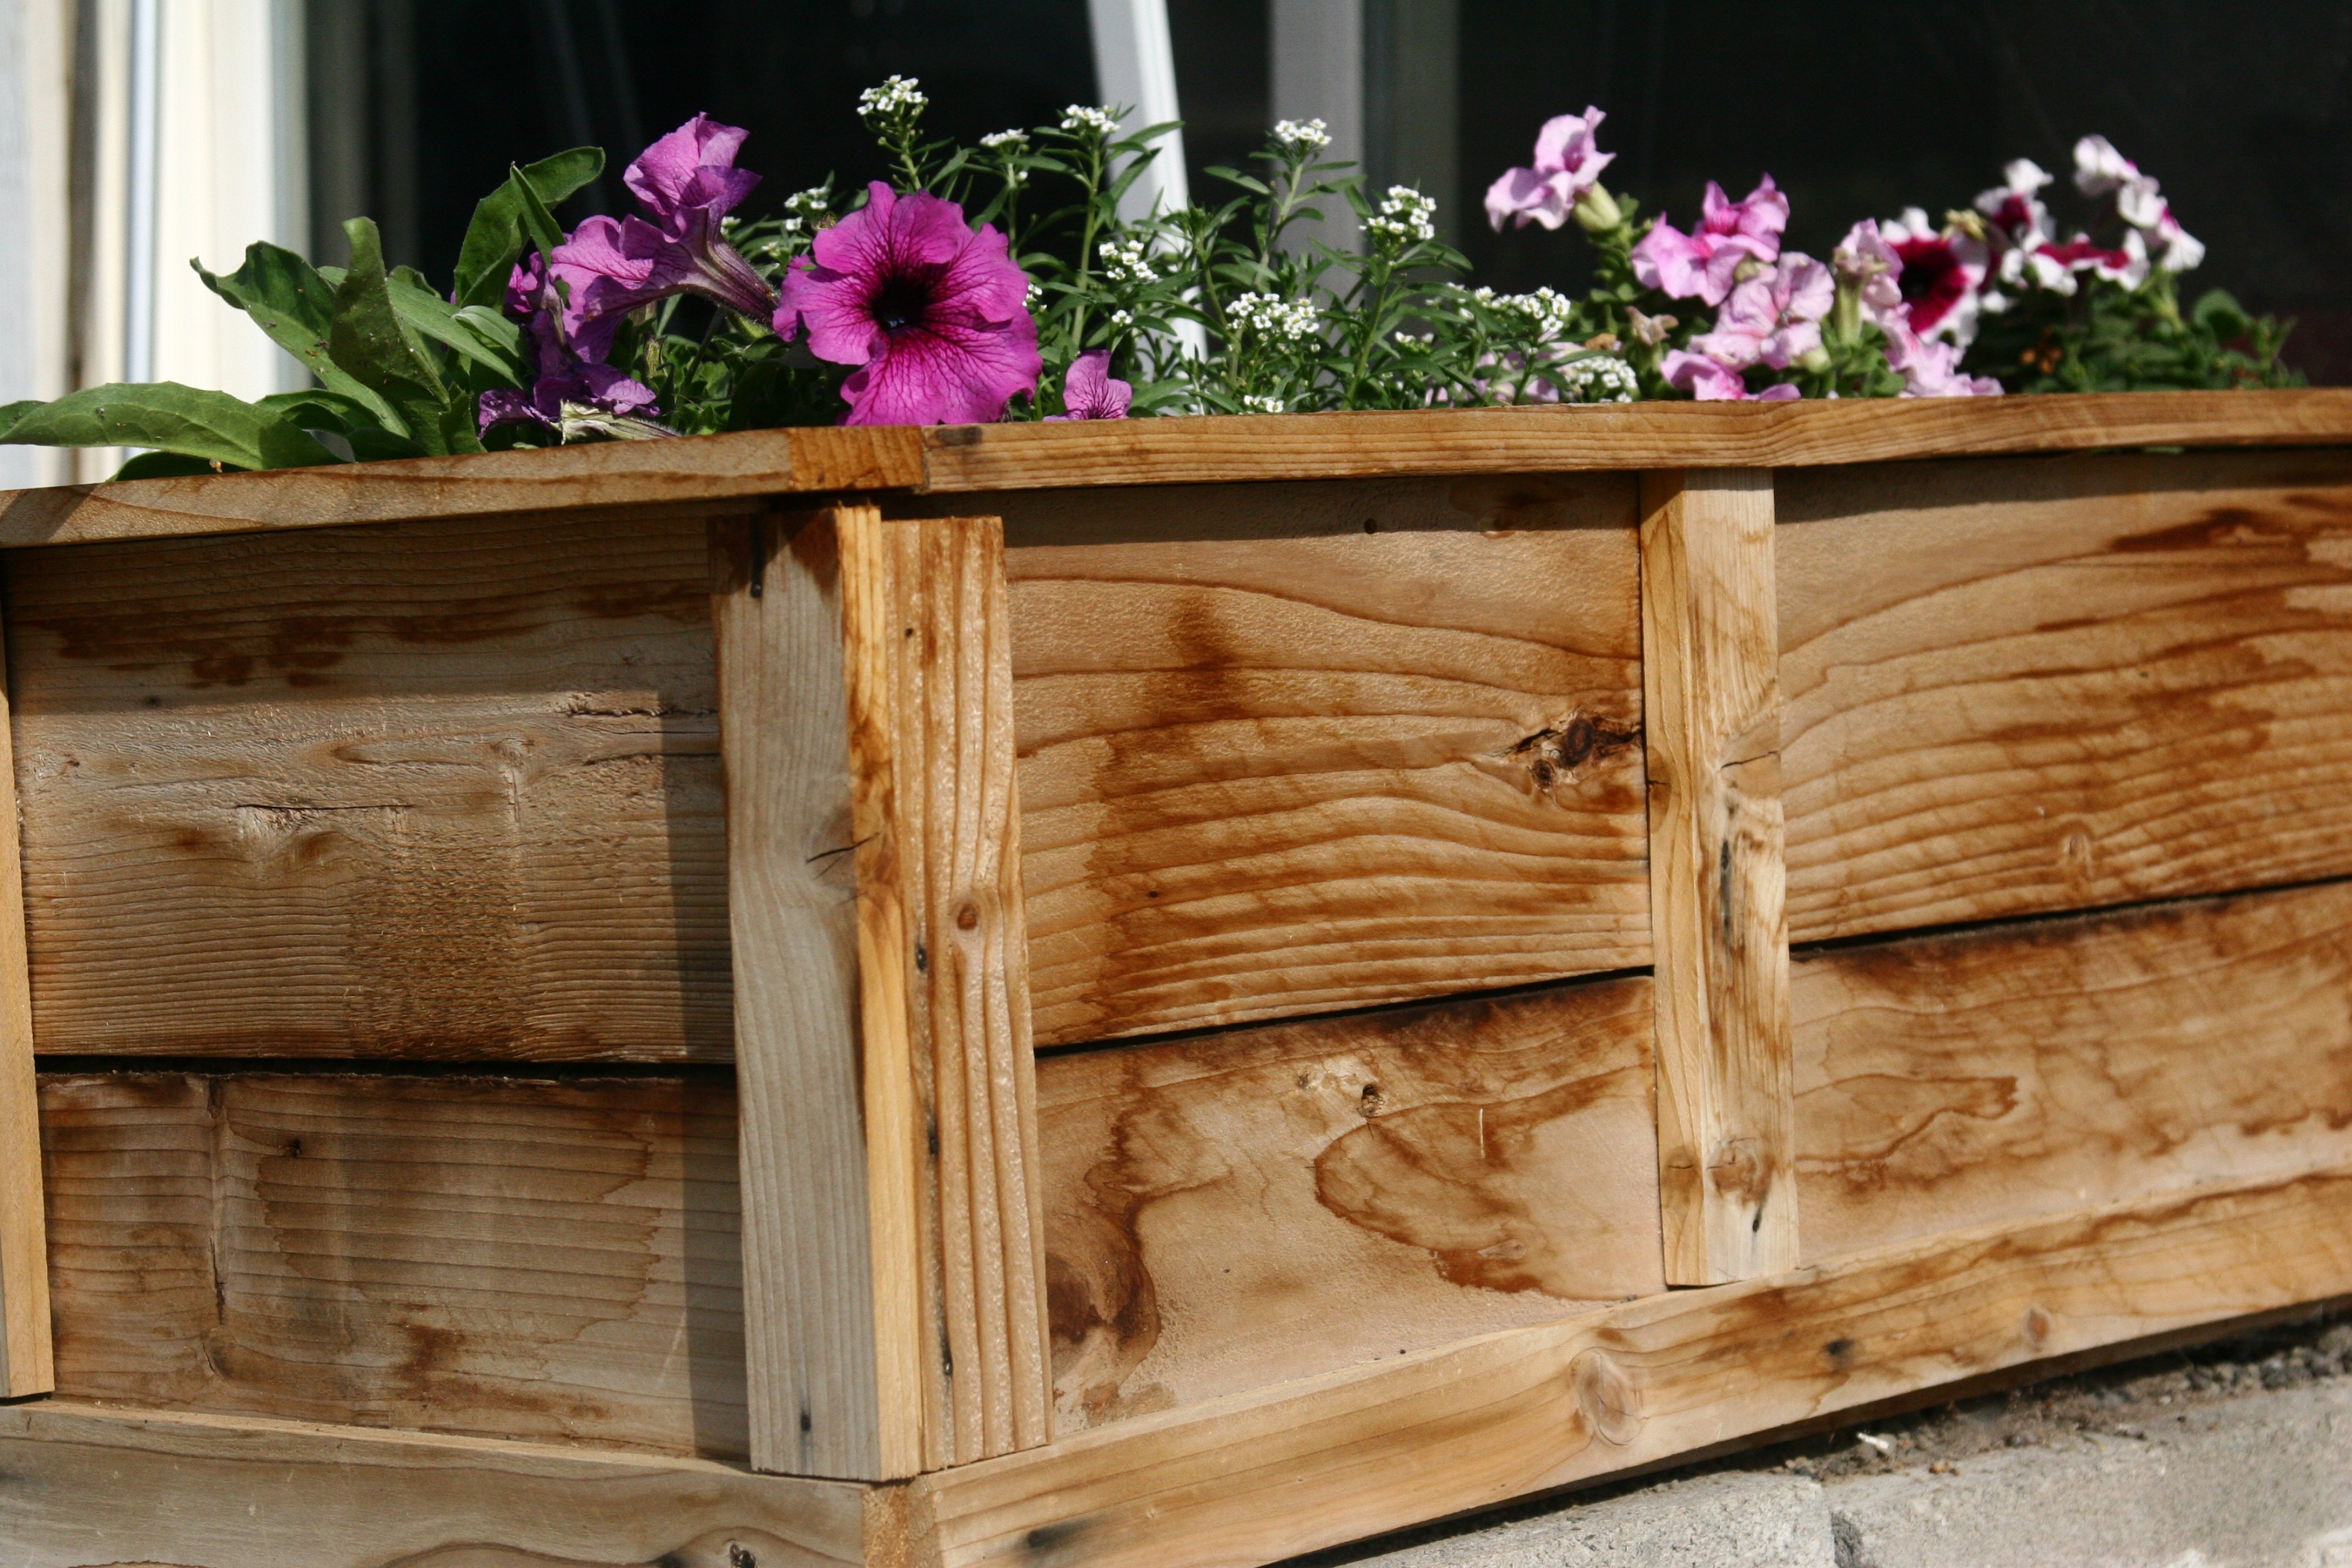 Ana White | Raised flower planter beds - DIY Projects